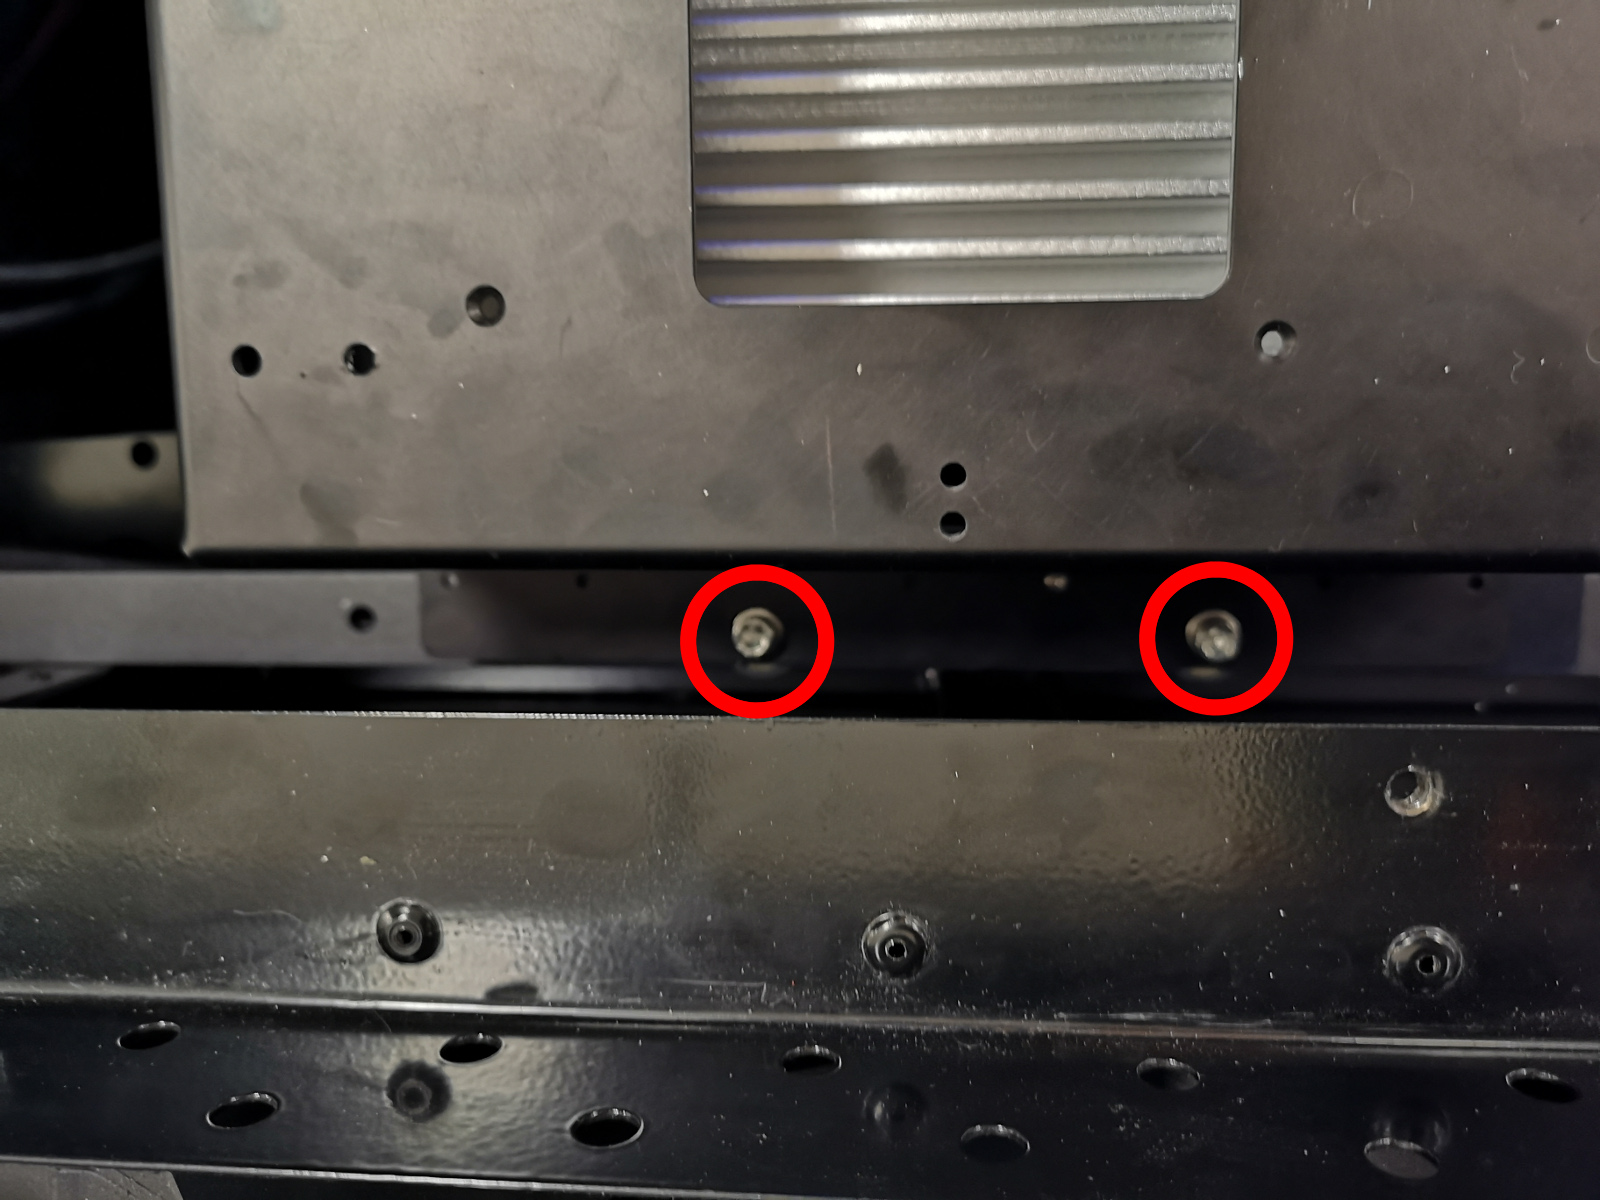 Screws on the right